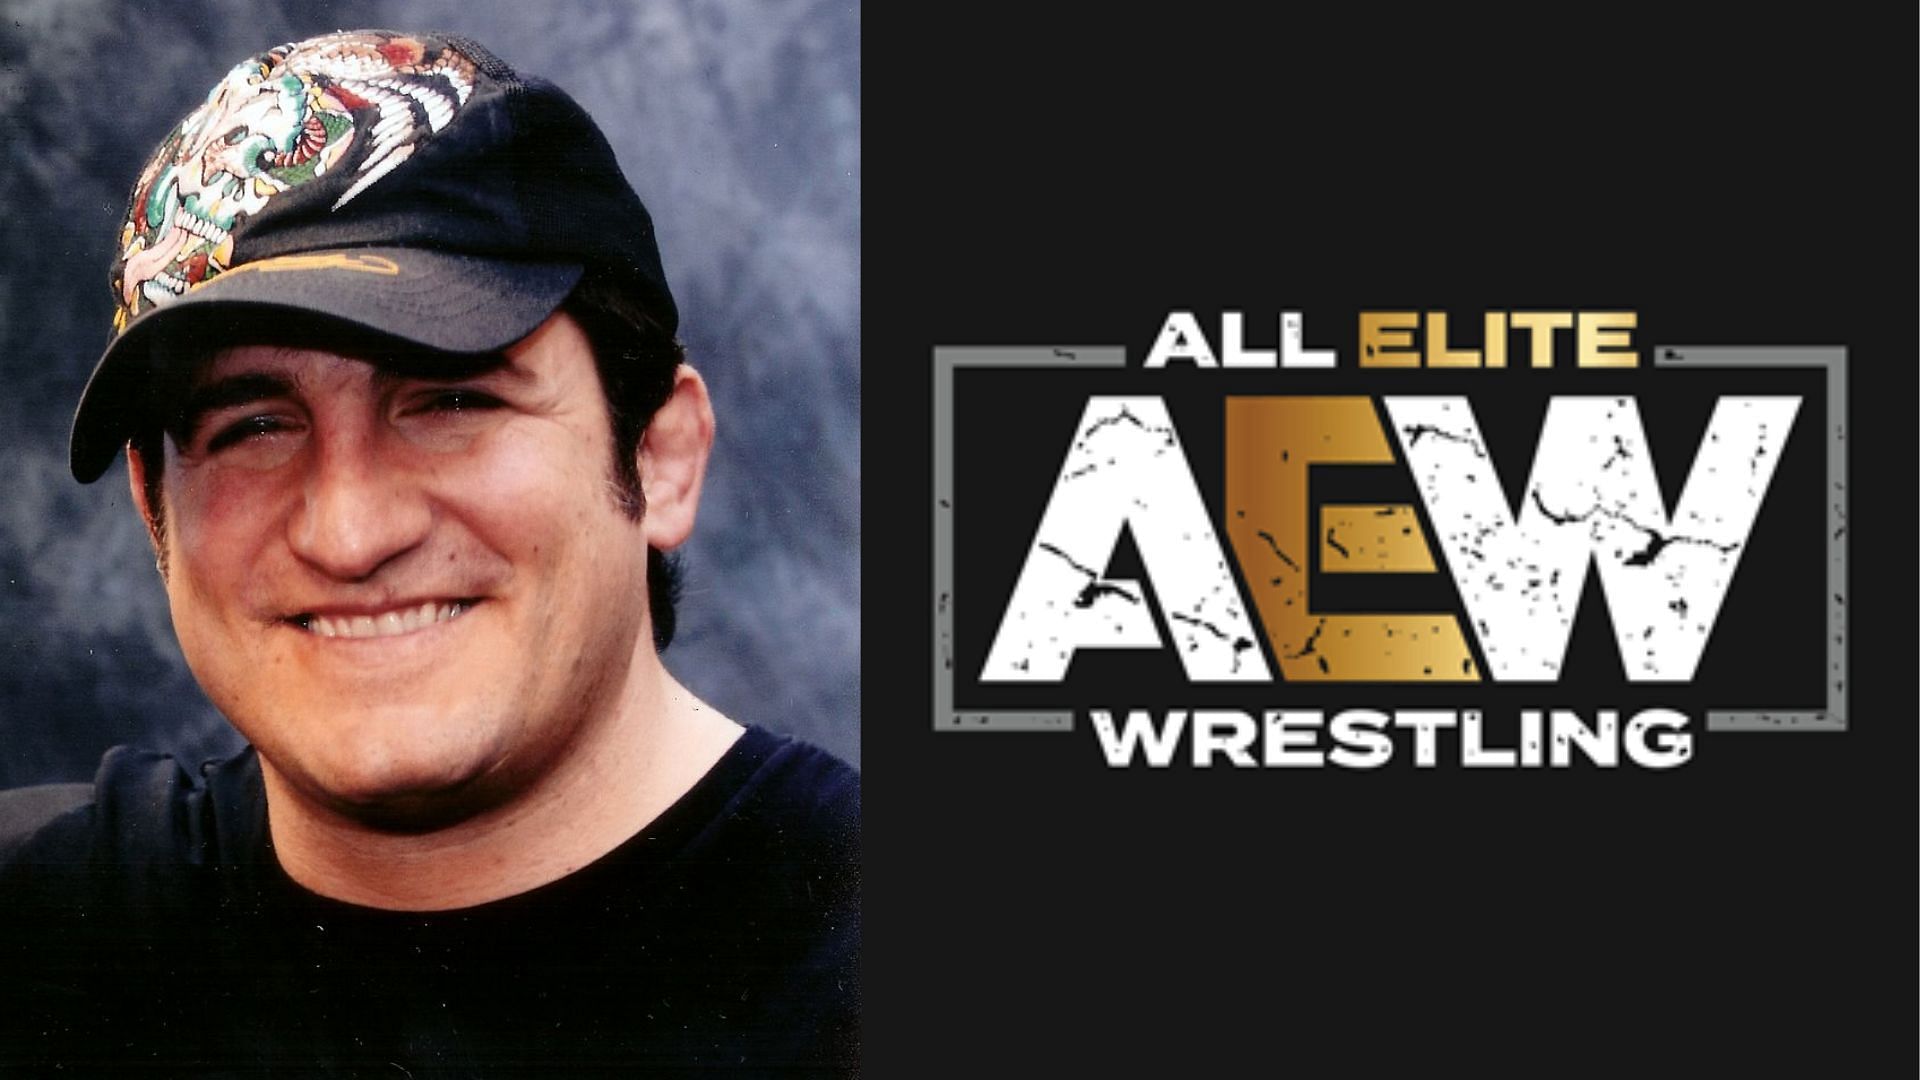 Disco Inferno unloaded on top AEW star